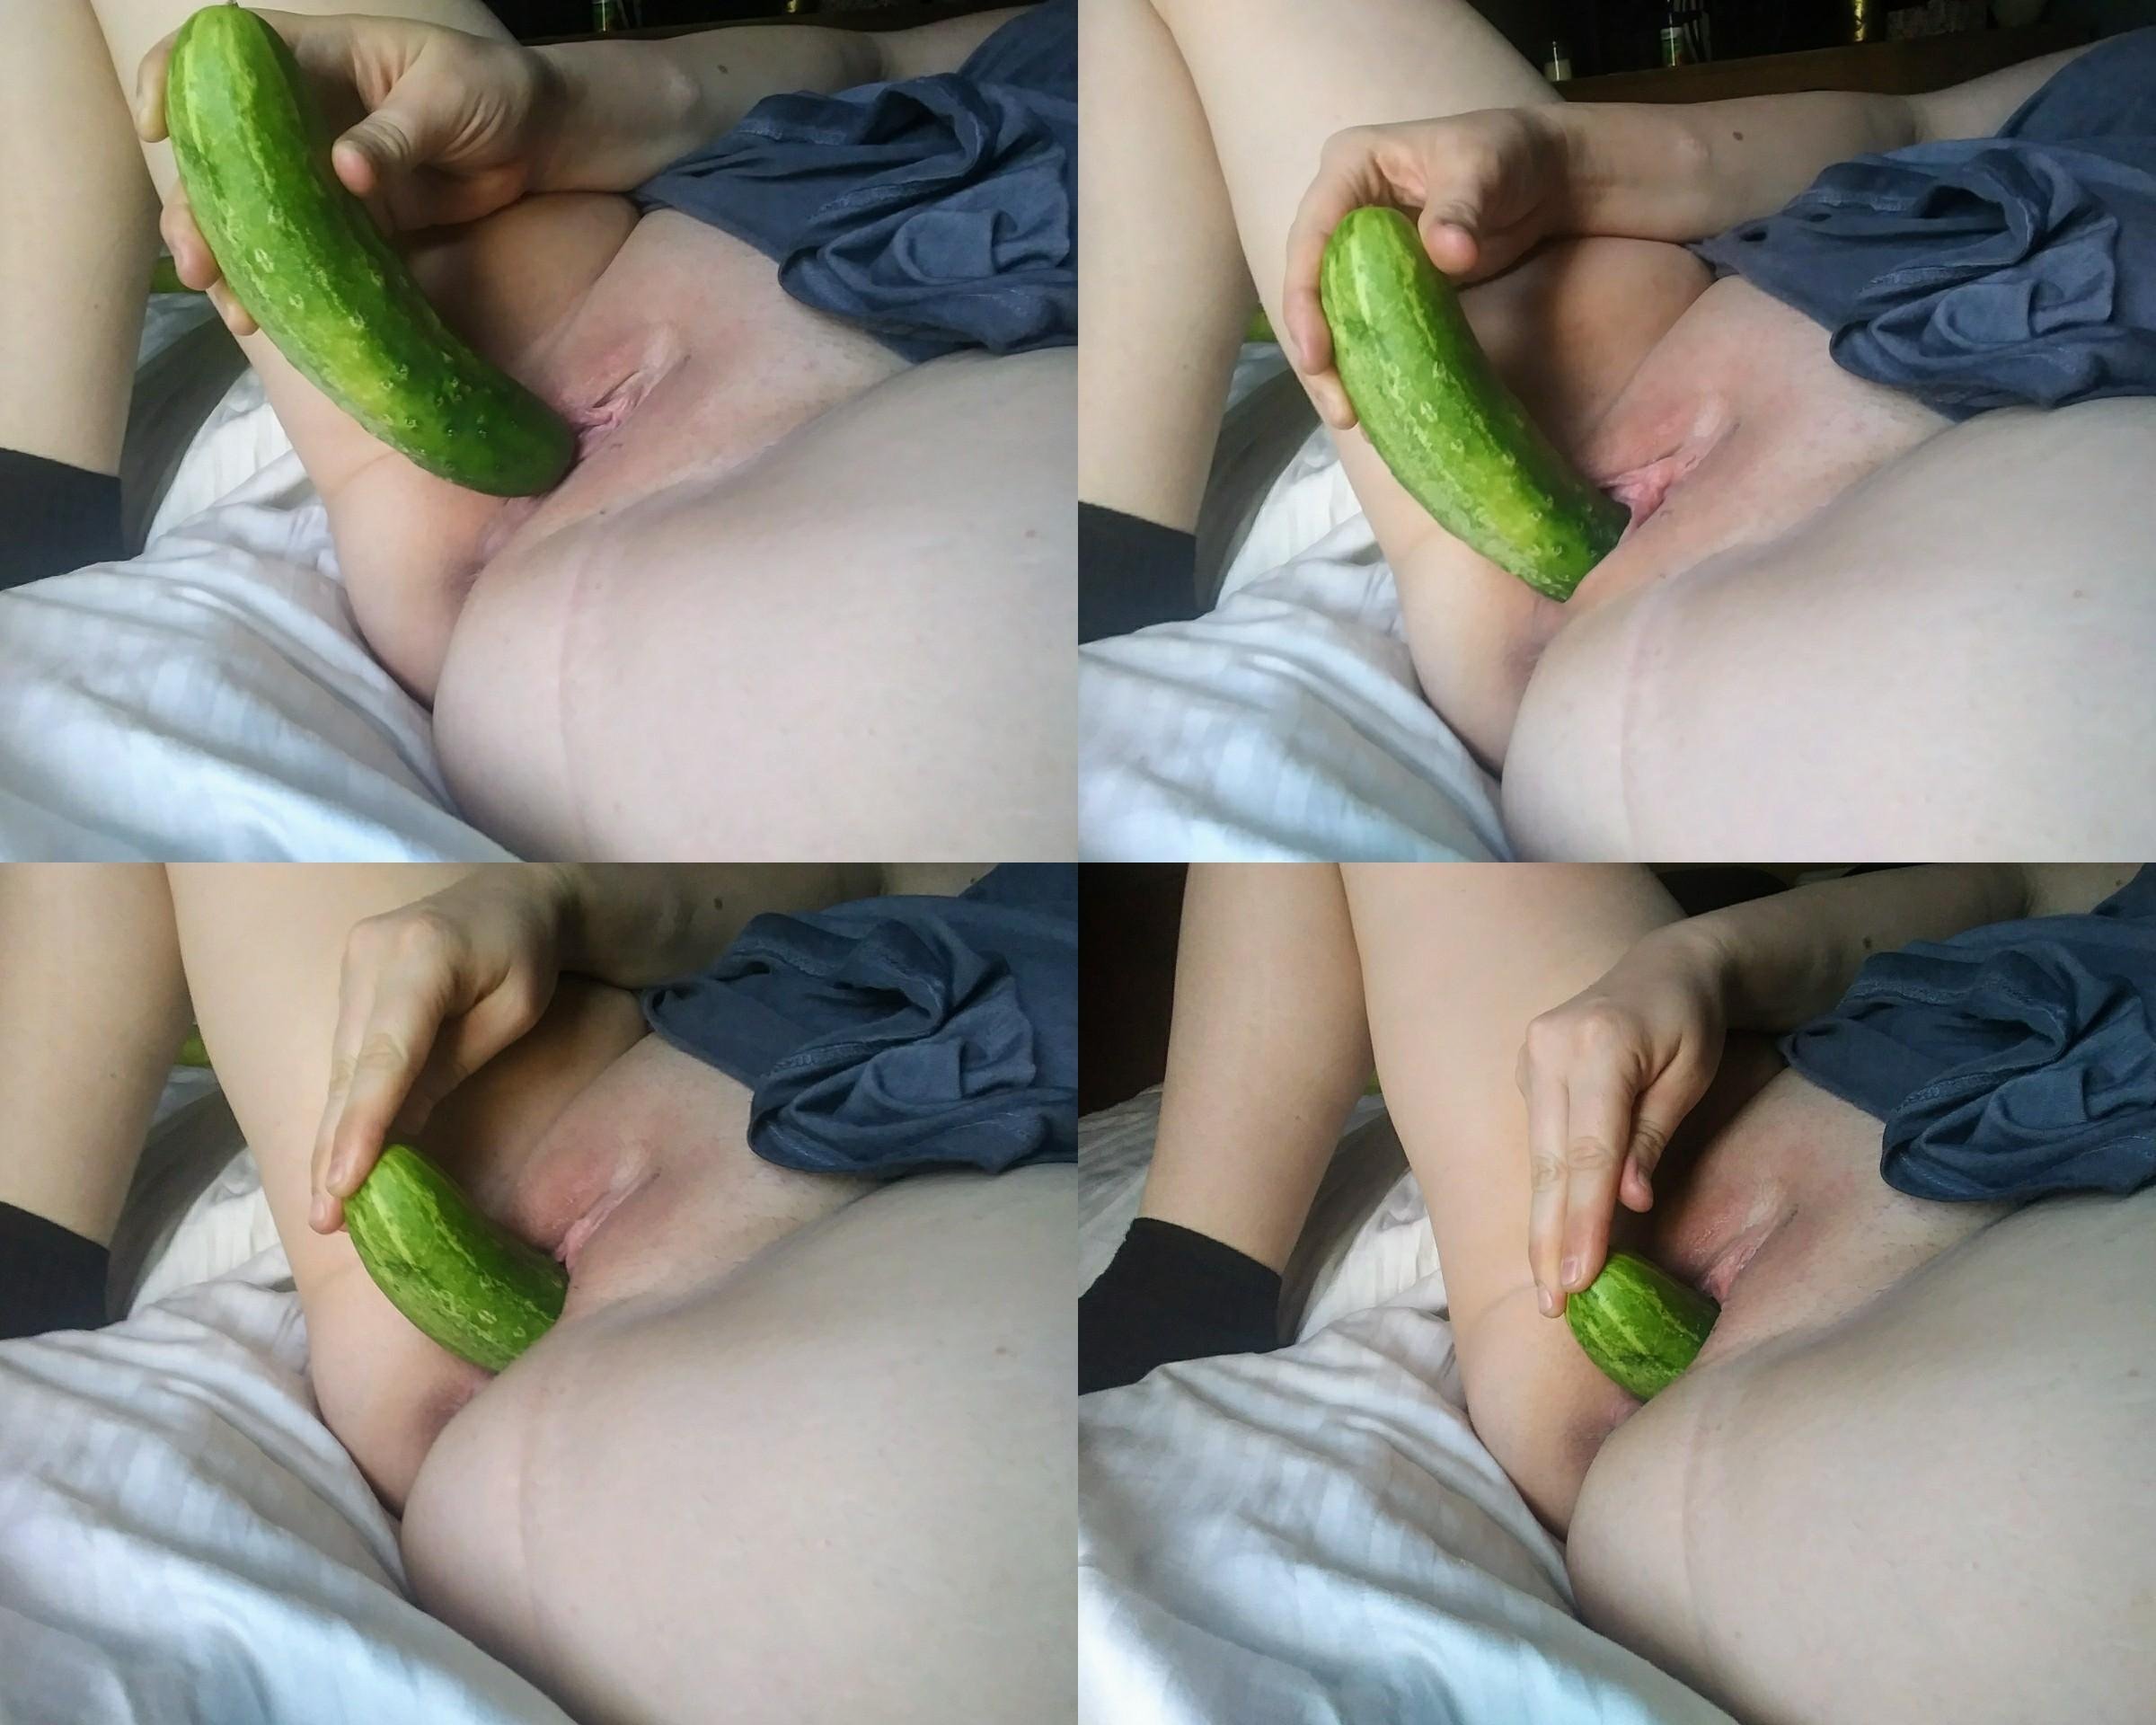 Journey of the cucumber. Gif to follow. ;)